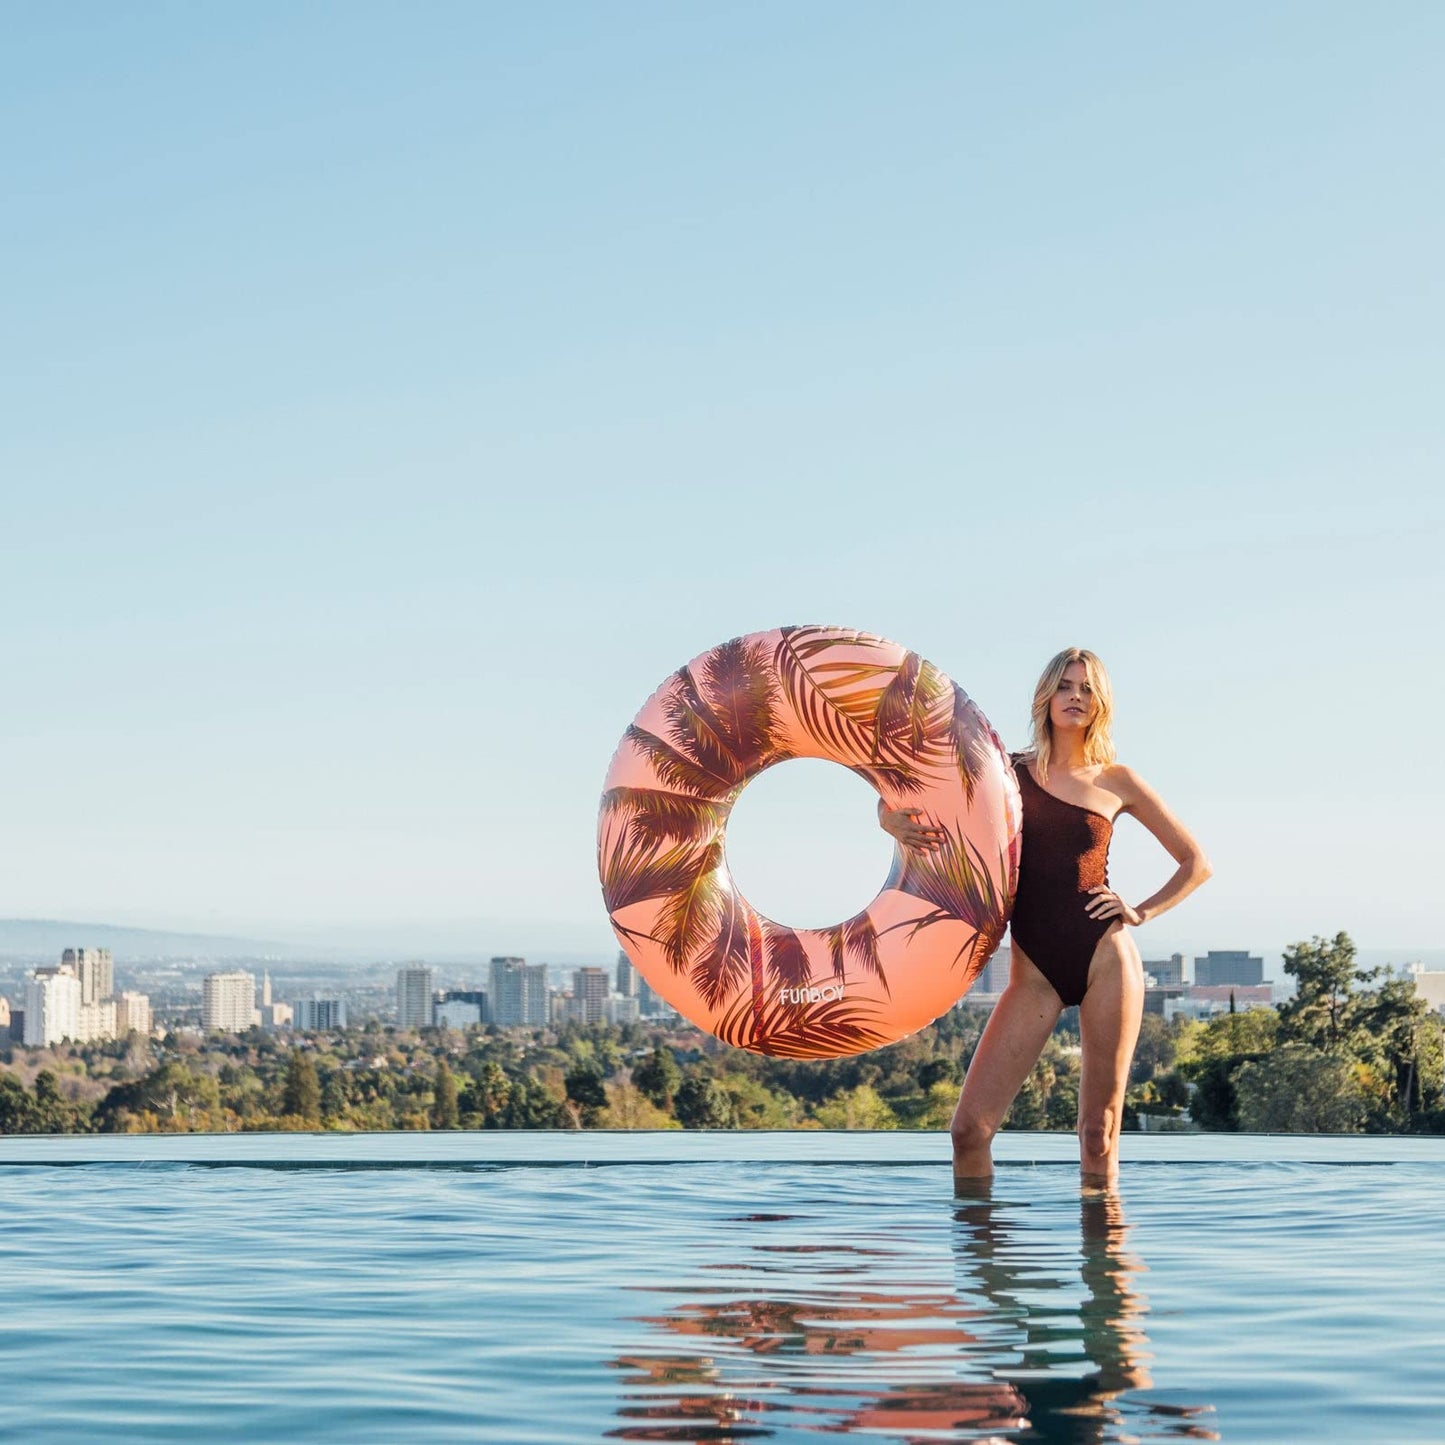 FUNBOY Giant Inflatable Vintage Cali Tube Float, Donut Style Pool Float, Luxury Raft for Summer Pool Parties and Entertainment, Bundle Pack of 2 Vintage Cali 2 Pack